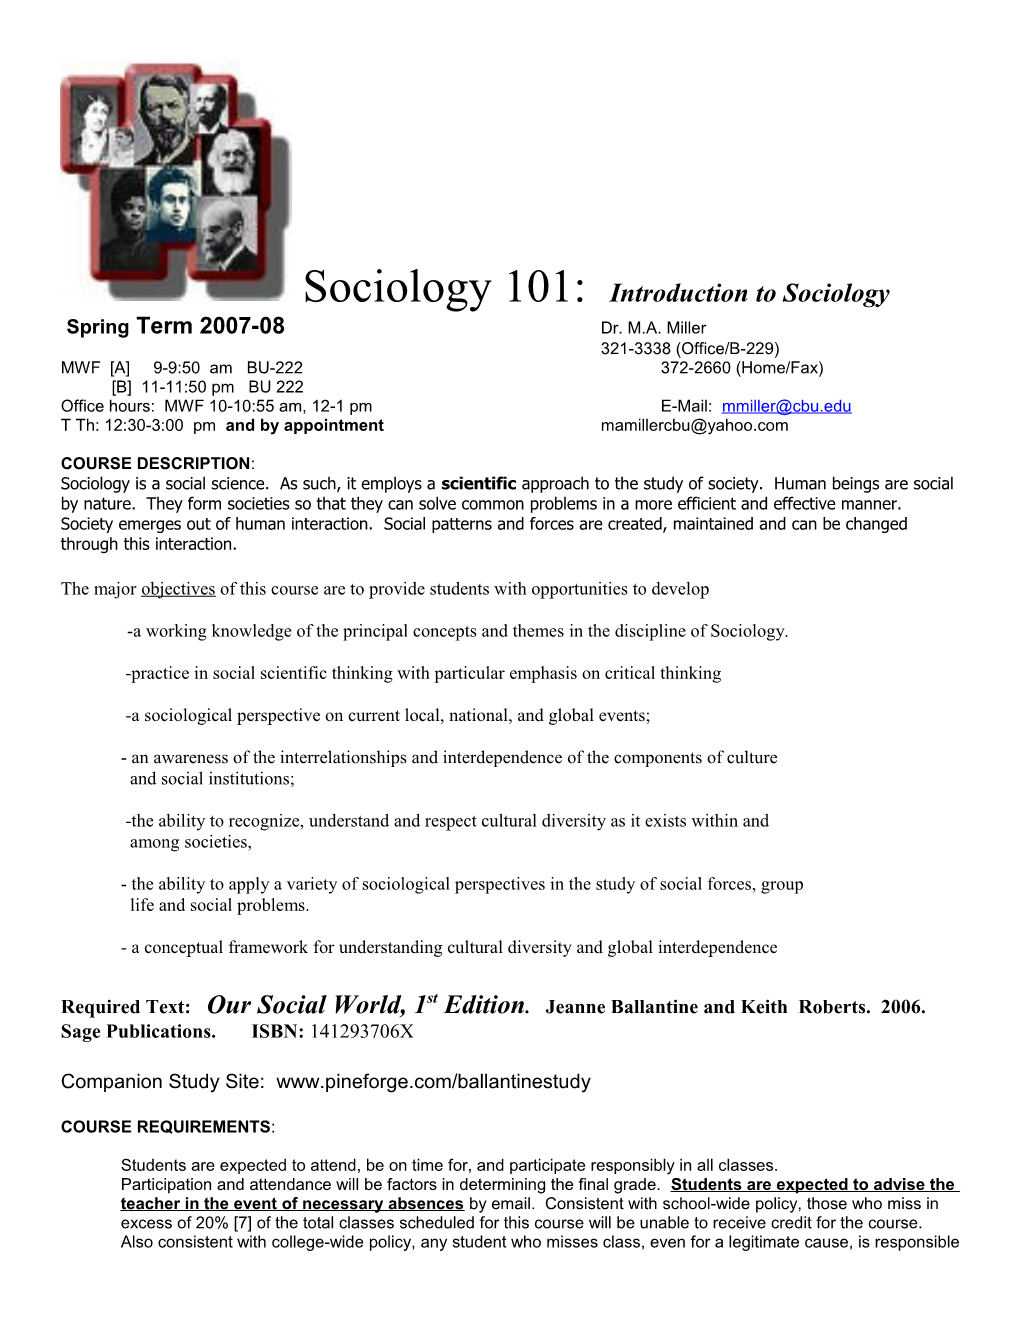 Soc 101: Introduction to Sociology